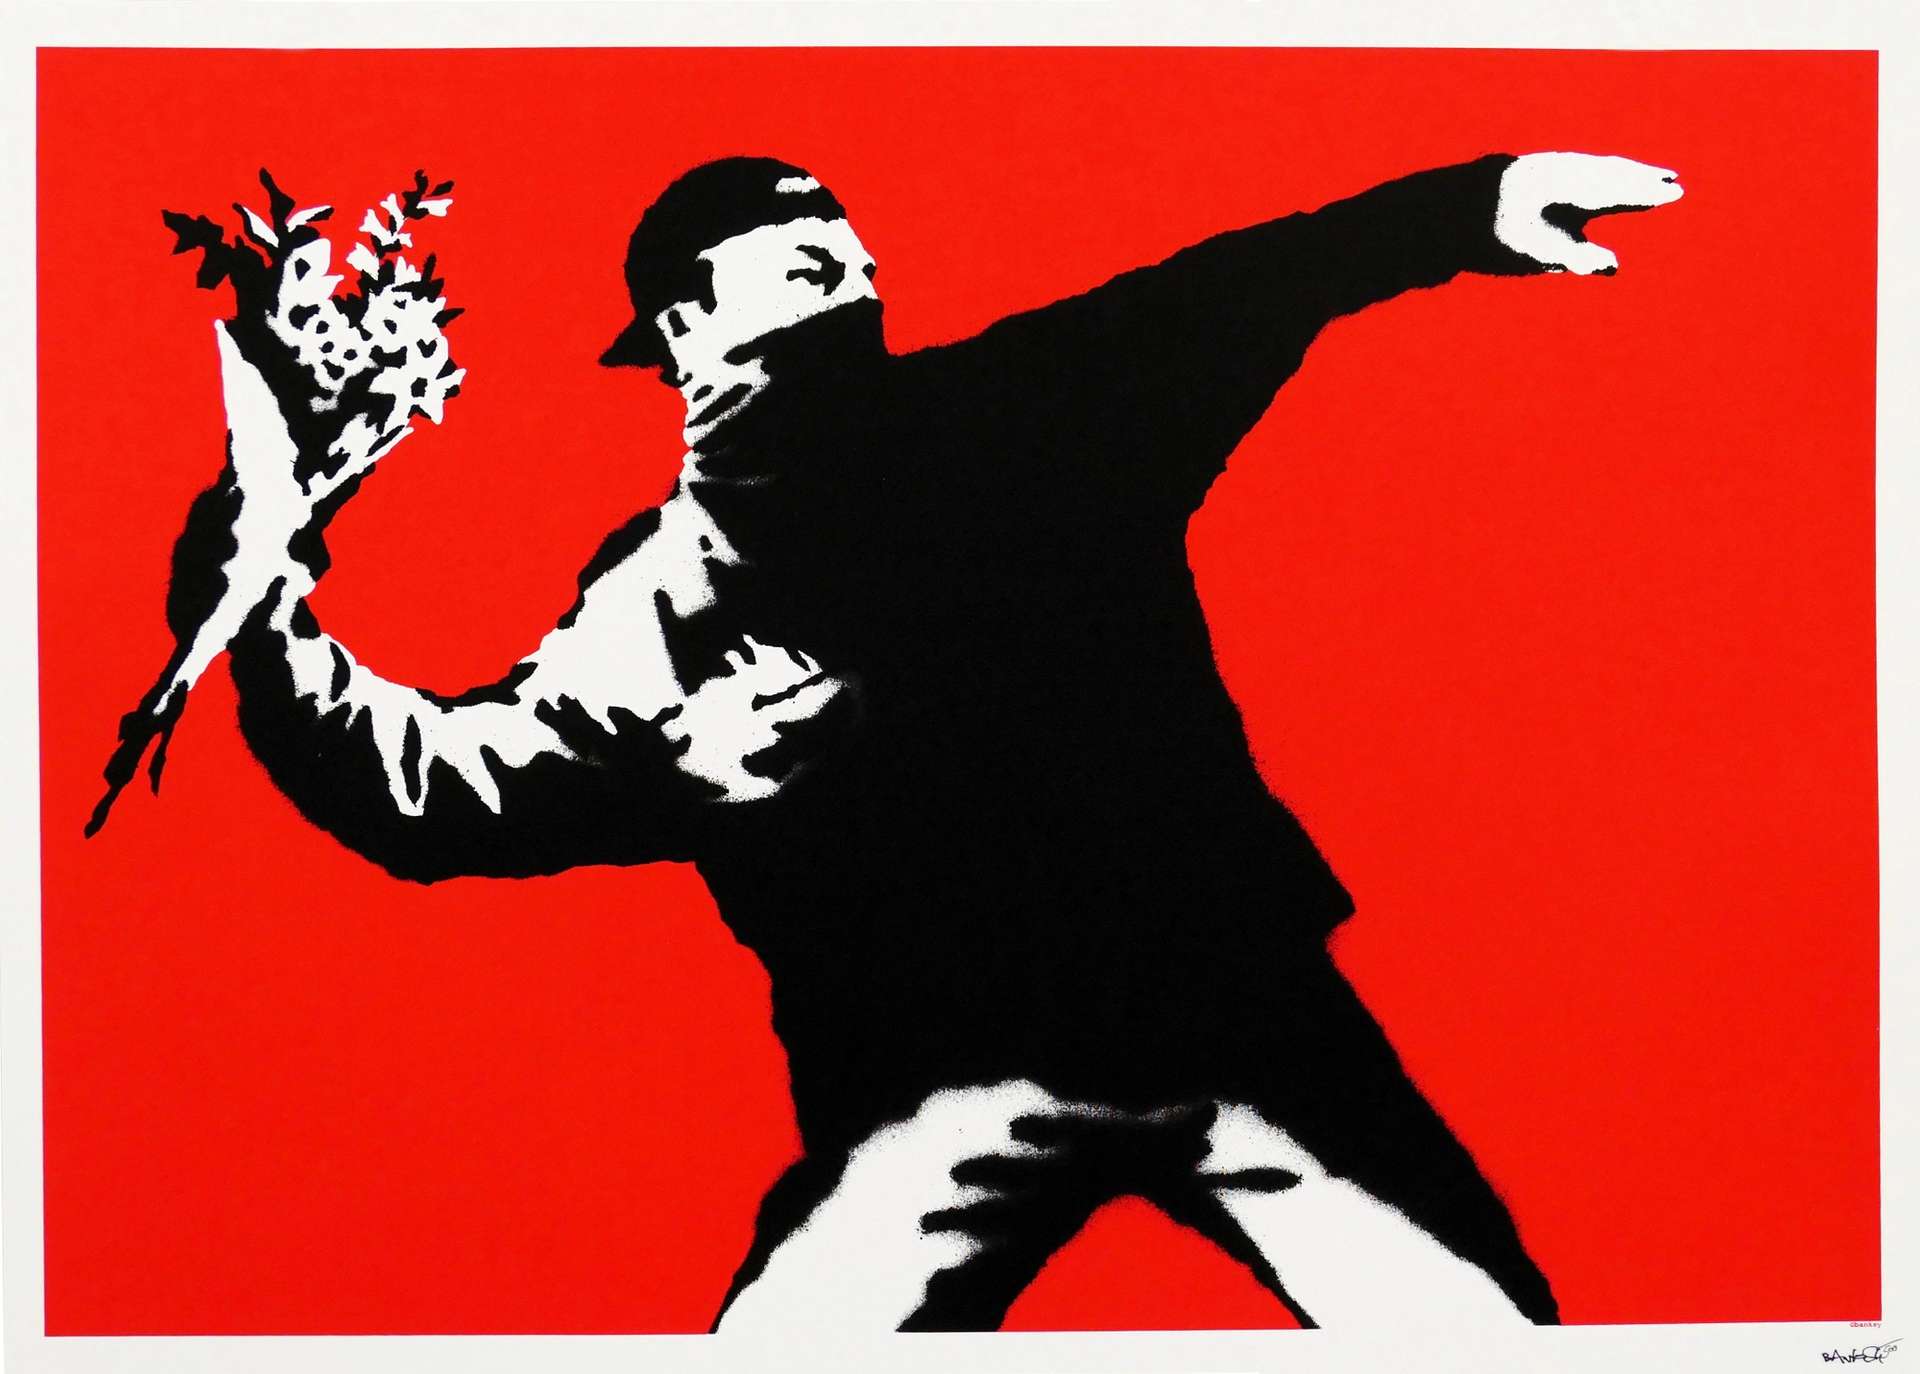 A screenprint by Banksy depicting a hooded man in black and white about to launch a bouquet of flowers, set against a red background.